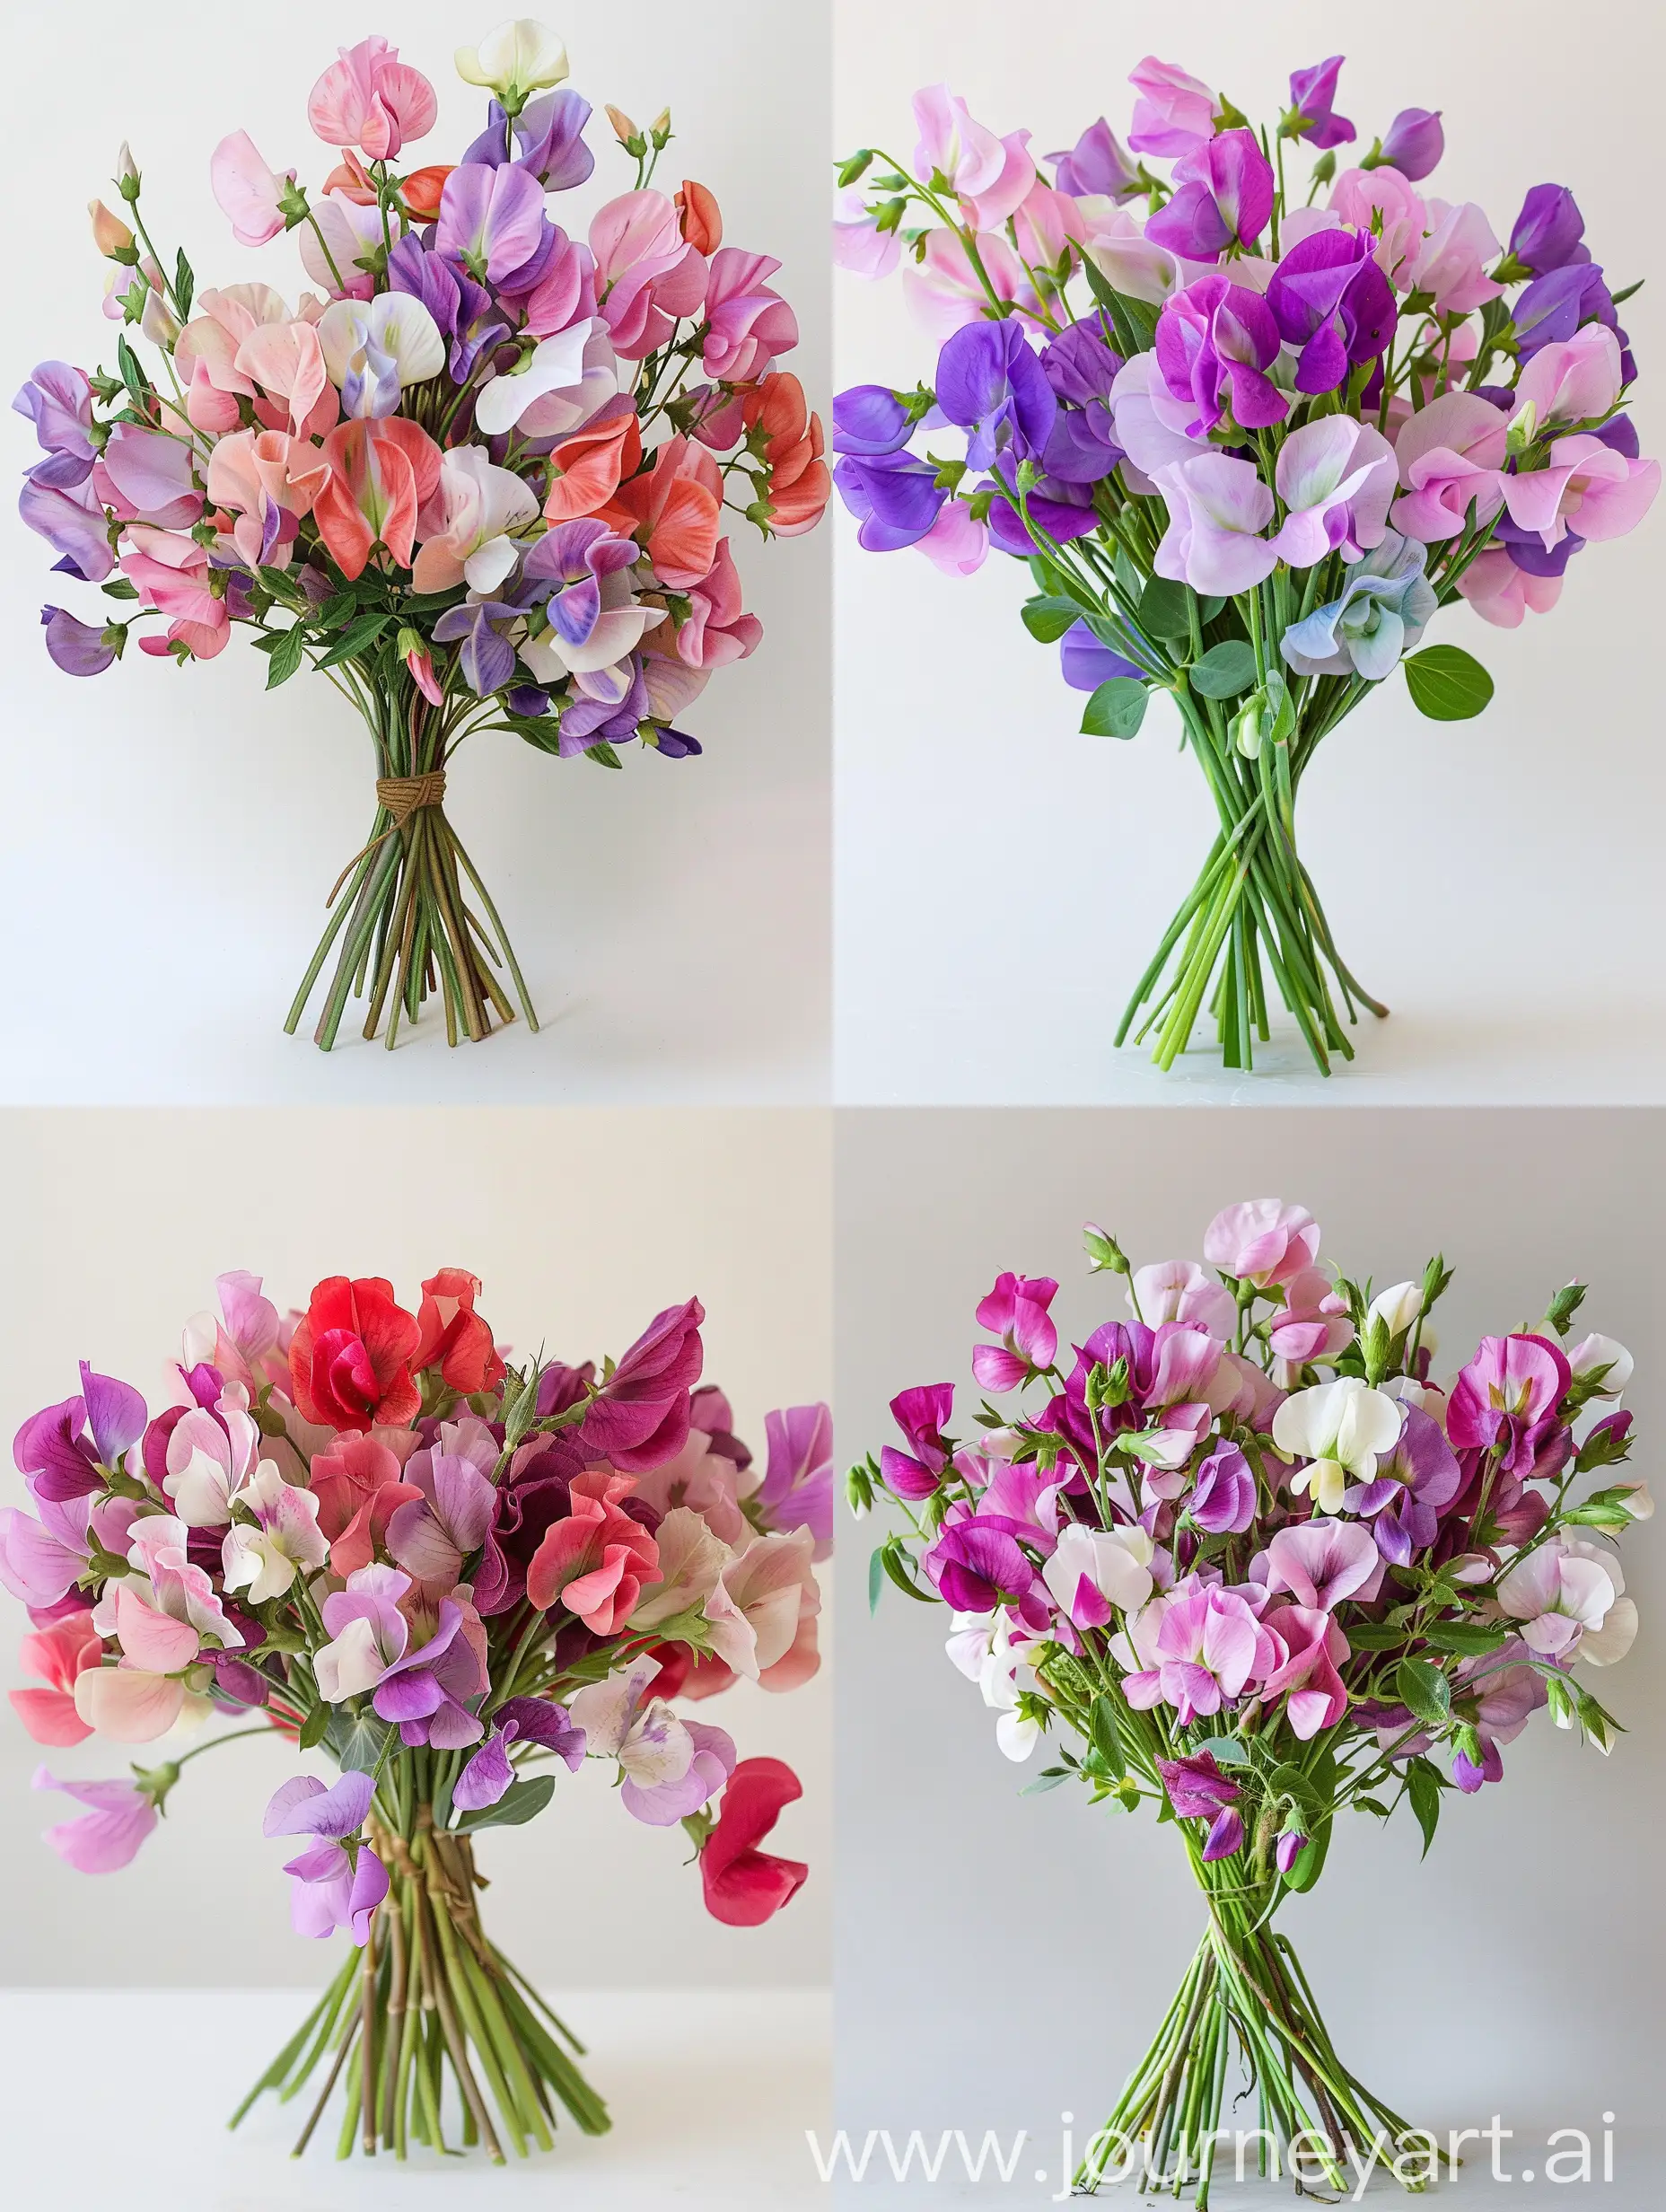 realistic bouquet of sweet peas, including the varieties Aoraki, Serendipity, and Susan Thomas